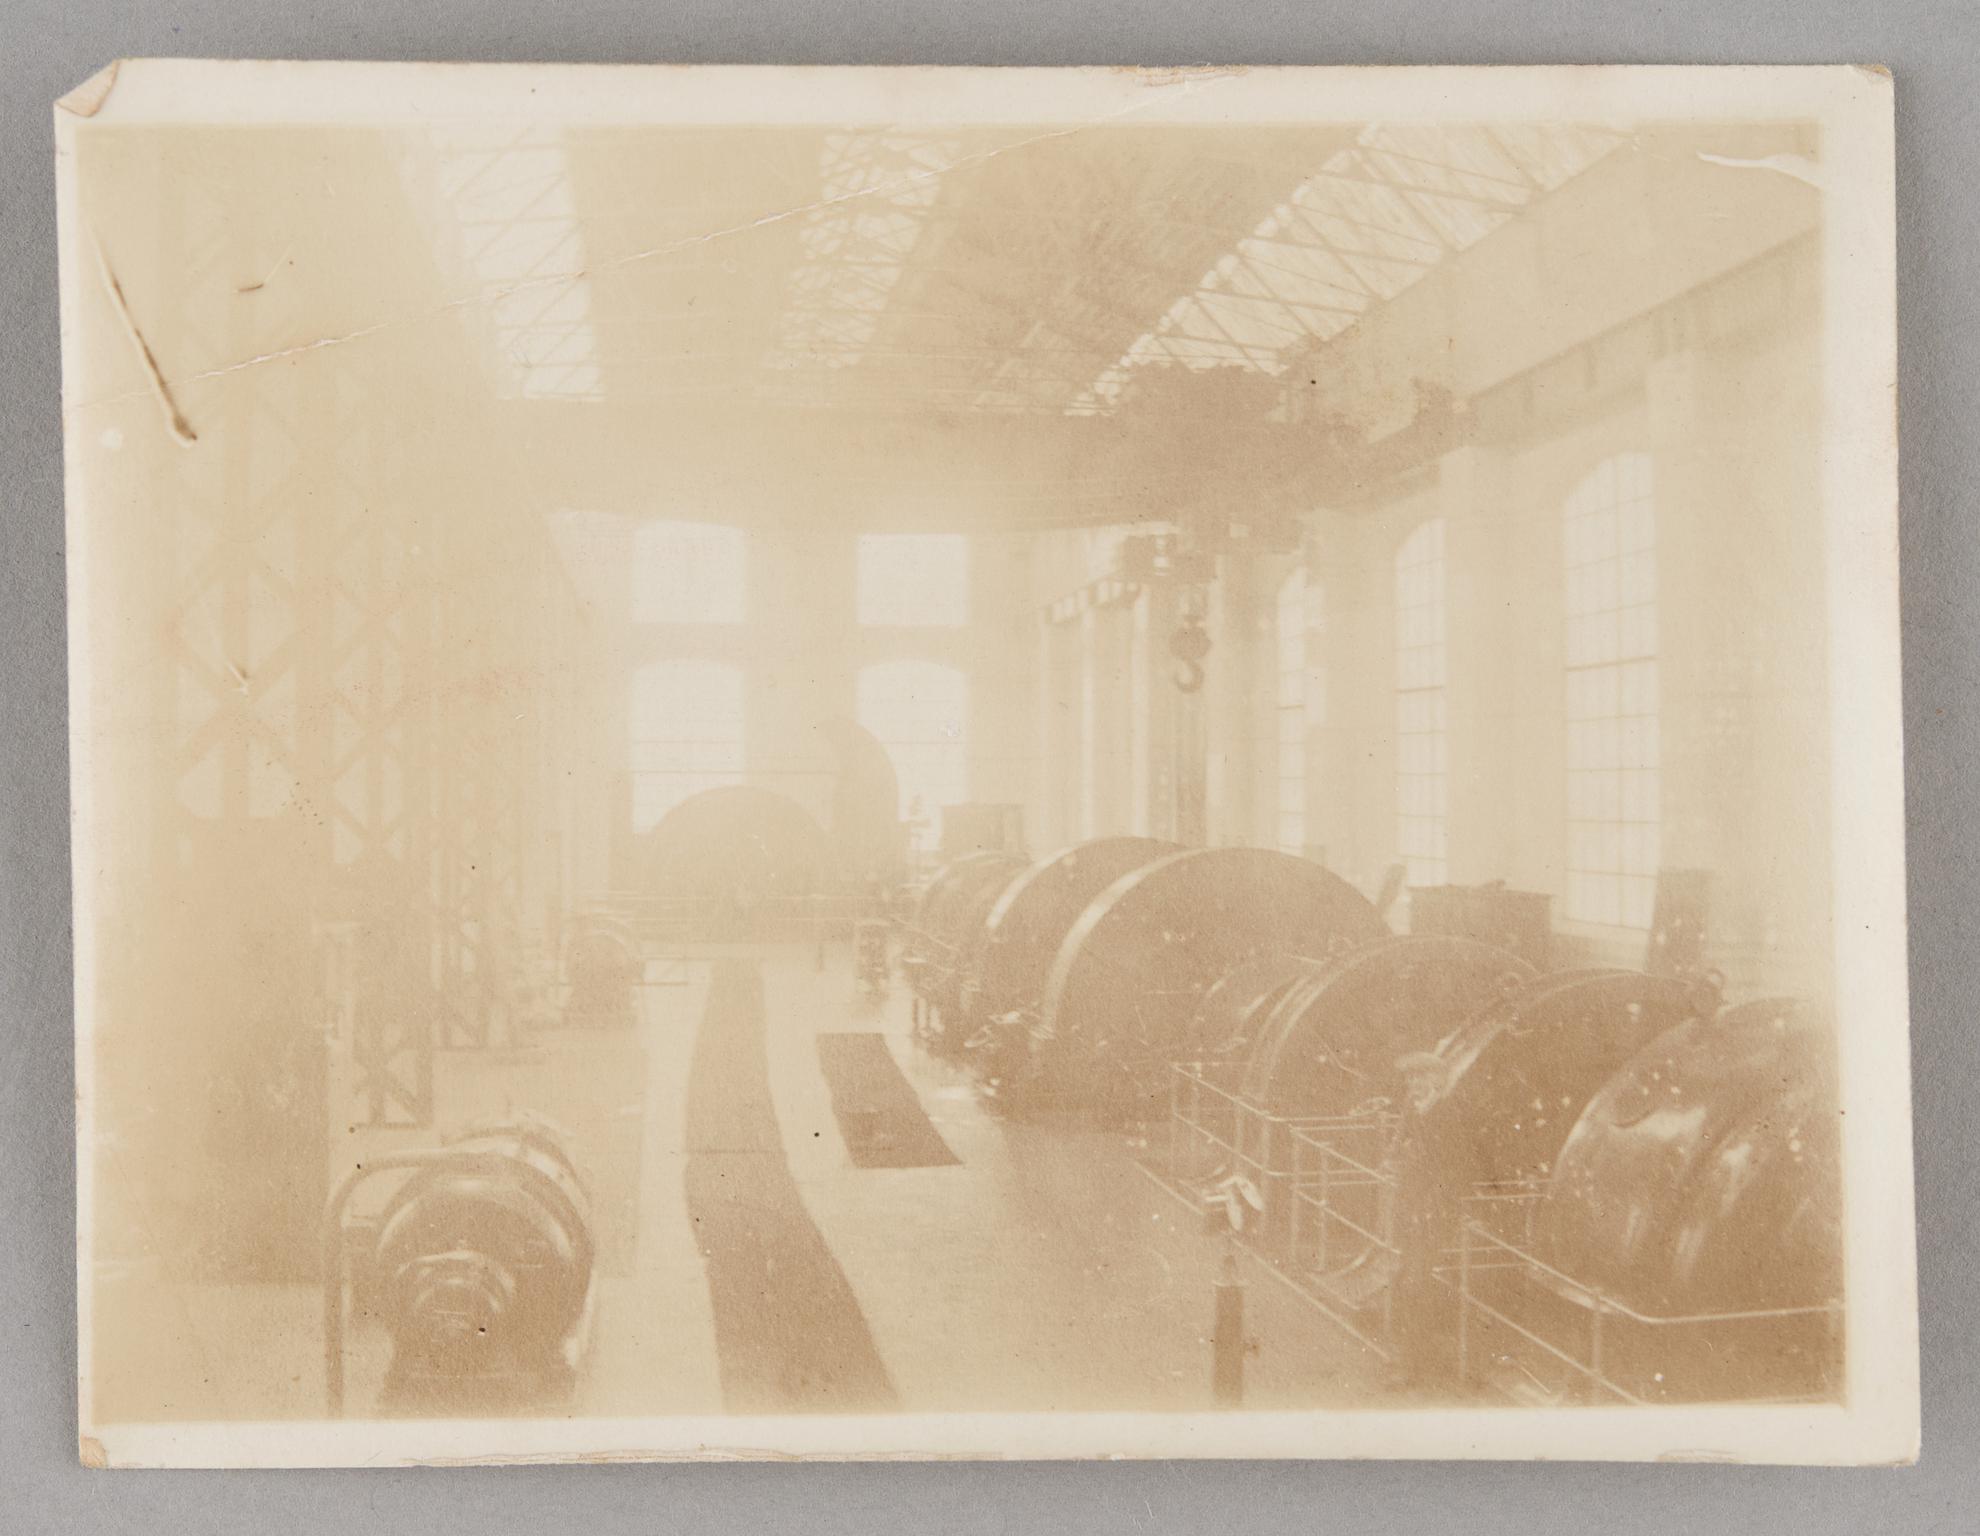 Power station at P.D. Colliery, photograph